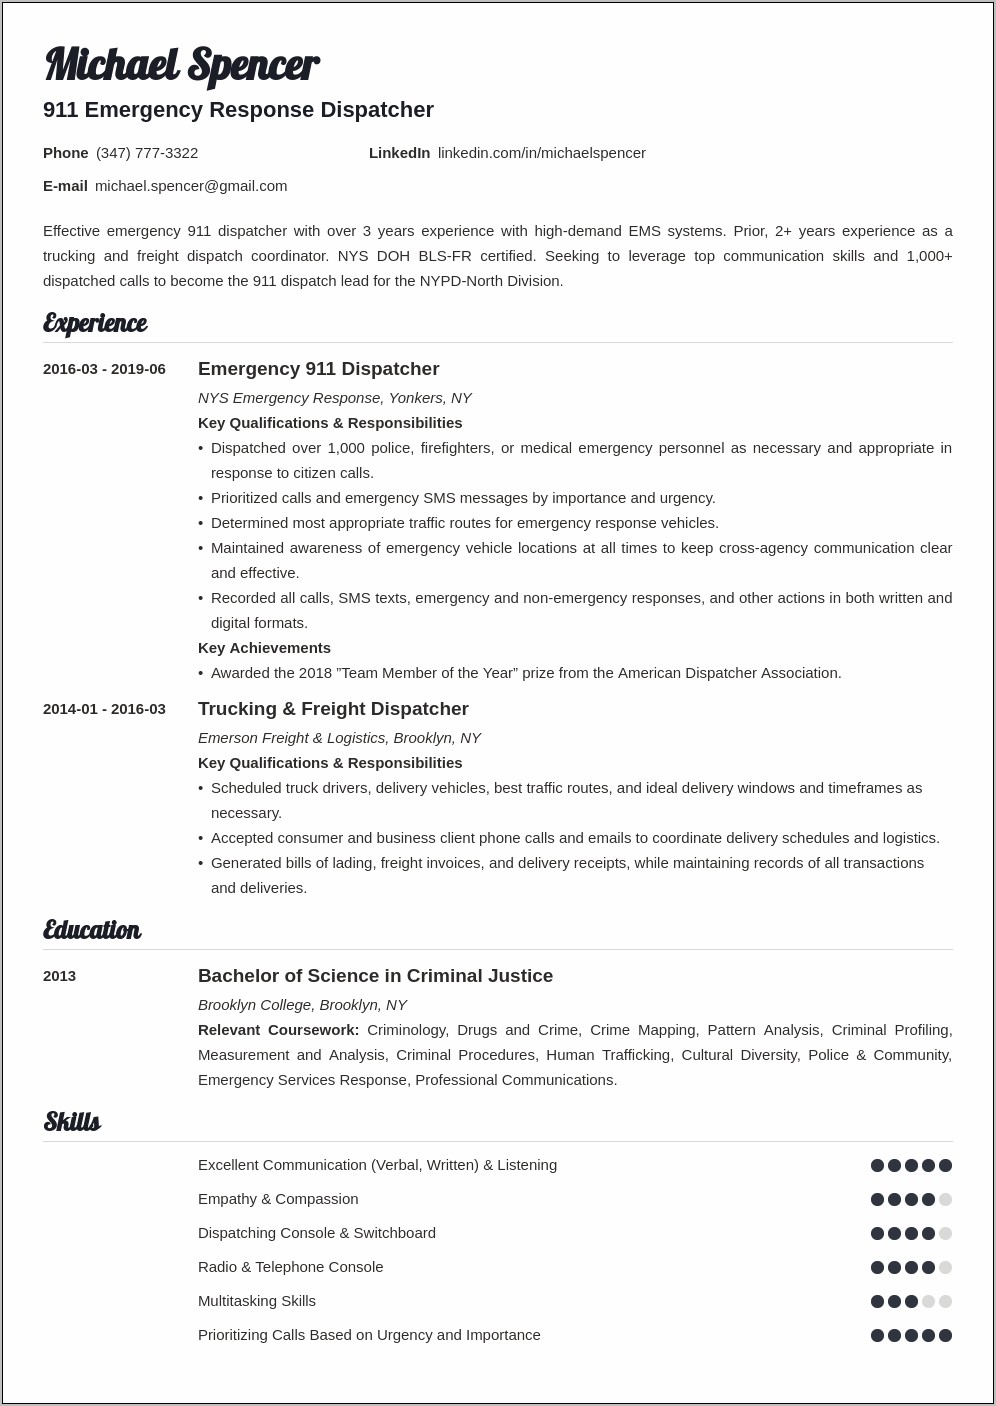 Example Resume For Tow Truck Dispatcher